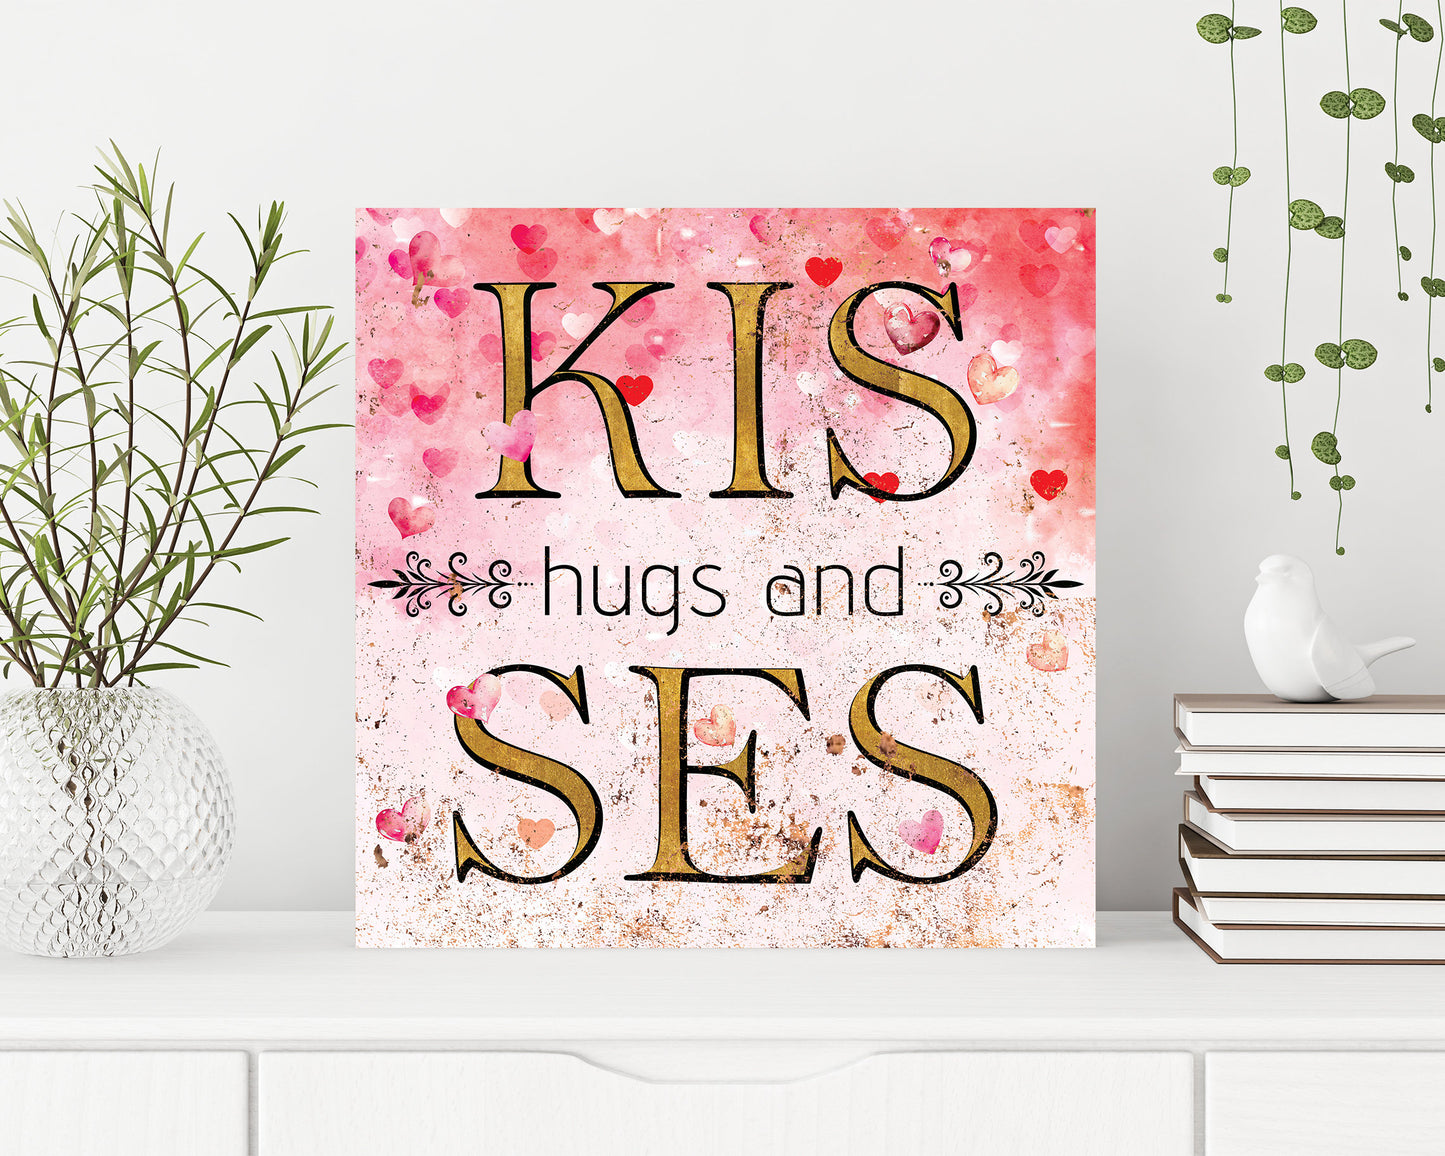 12in Hugs and Kisses Valentine Sign, Vintage Valentine's Decor, Modern Farmhouse Mantel Entryway Decor, Valentine's Day Canvas Sign